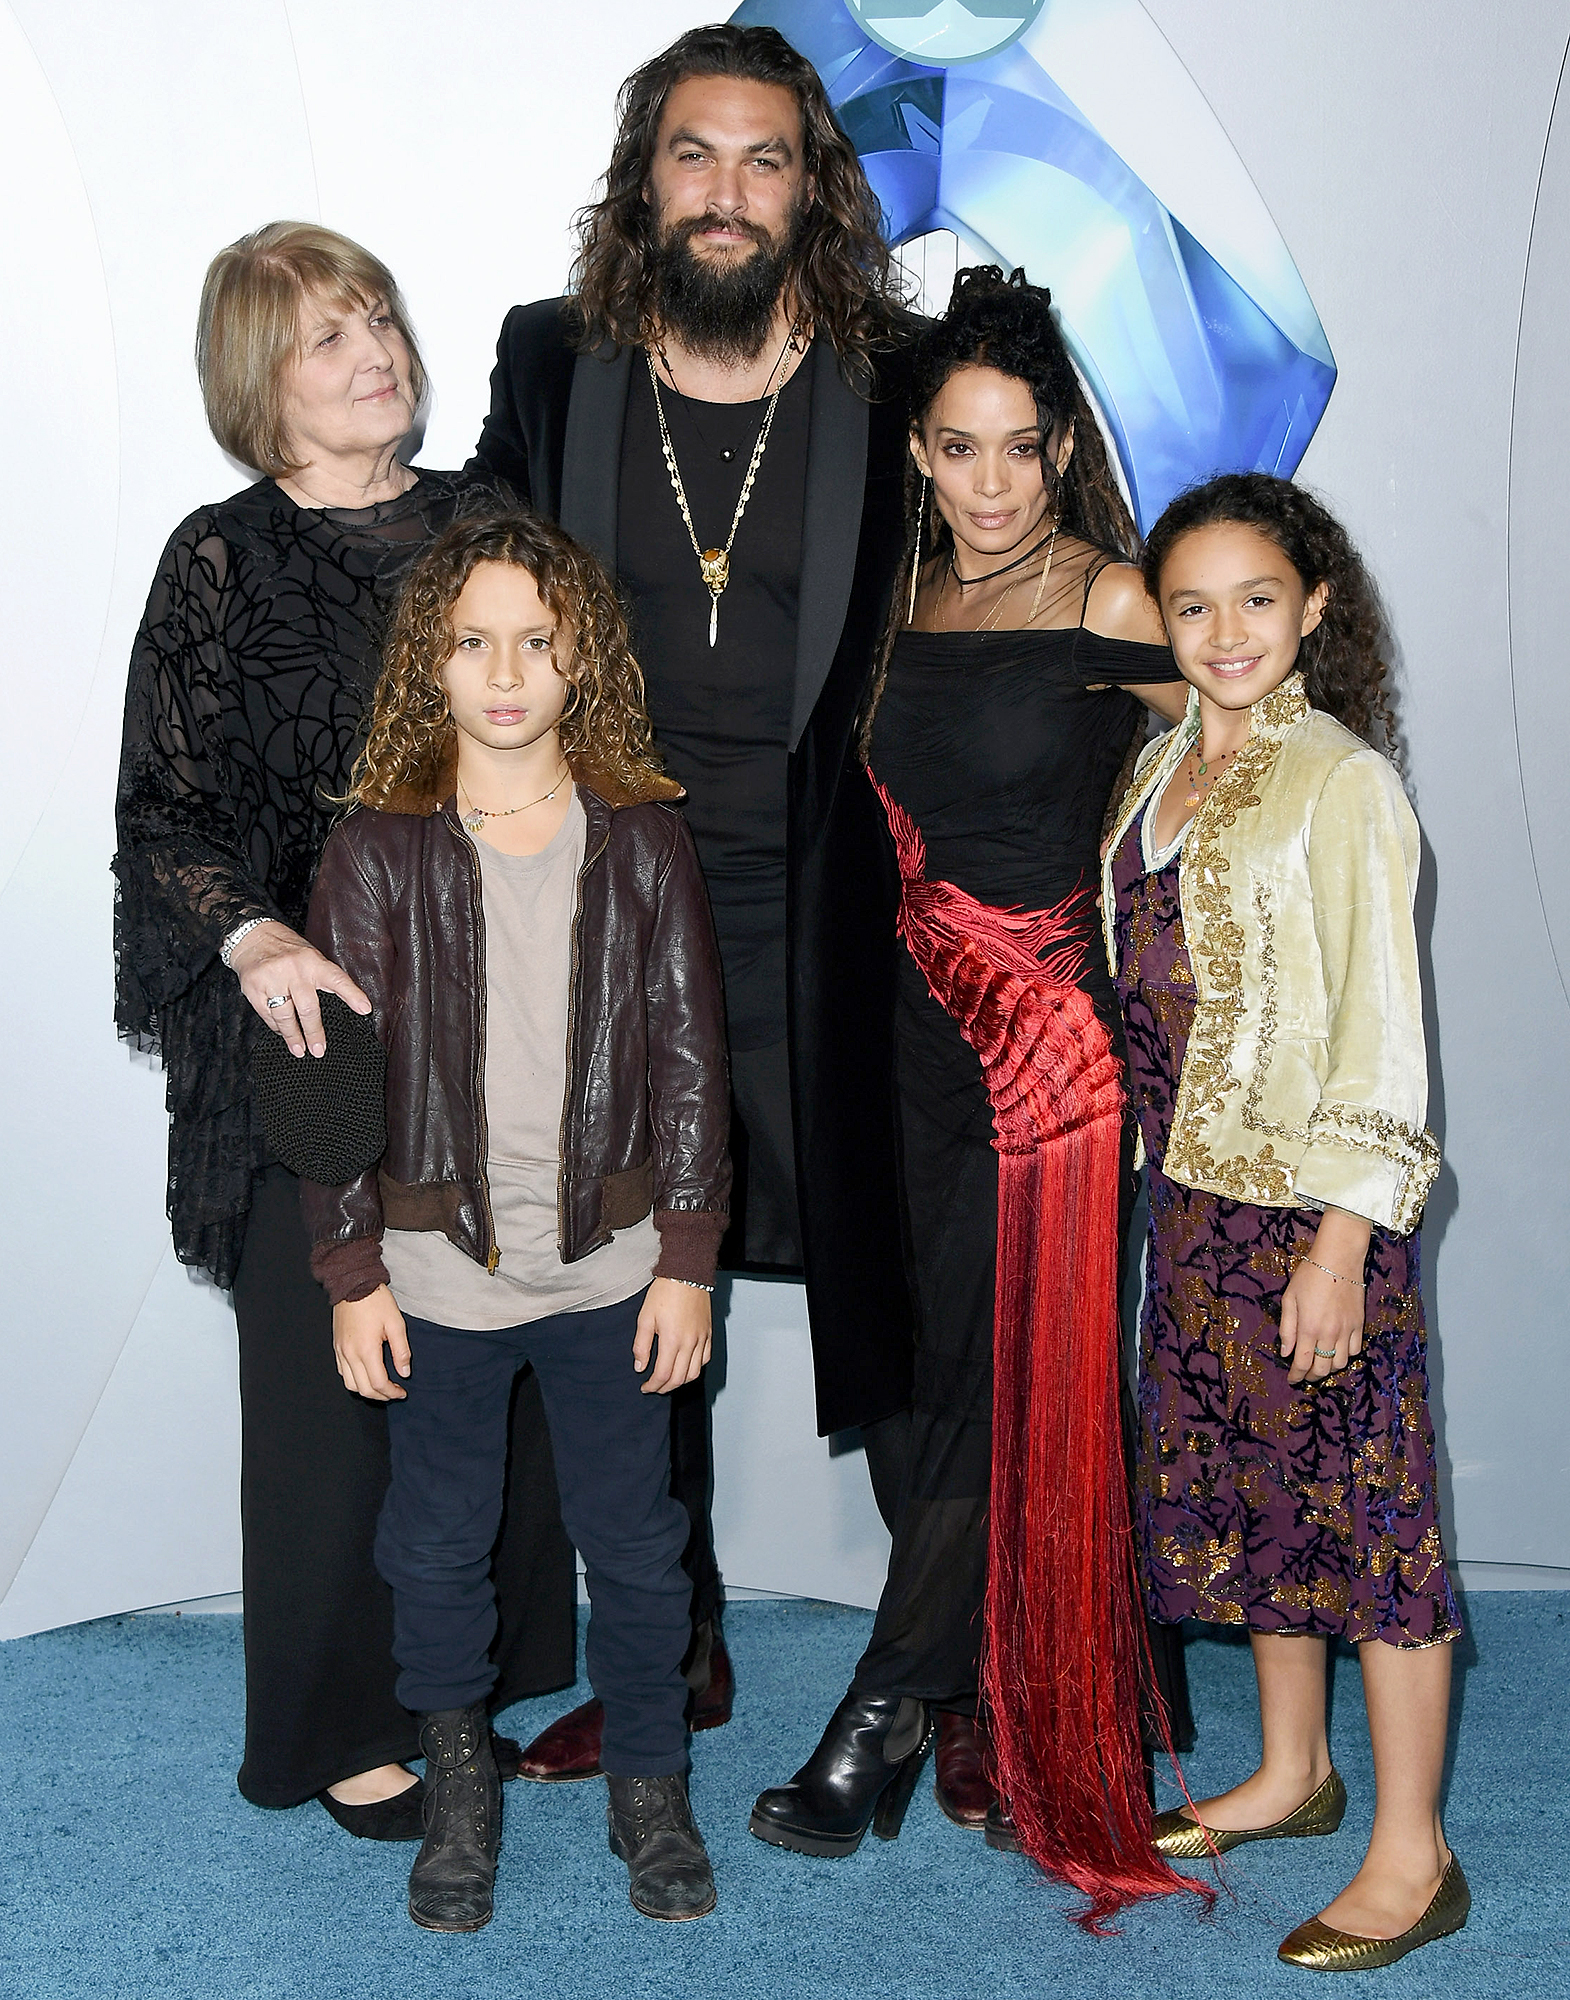 20 Pics Of Jason Momoa And His Kids That Make Us Swoon Every Time1570 x 2000